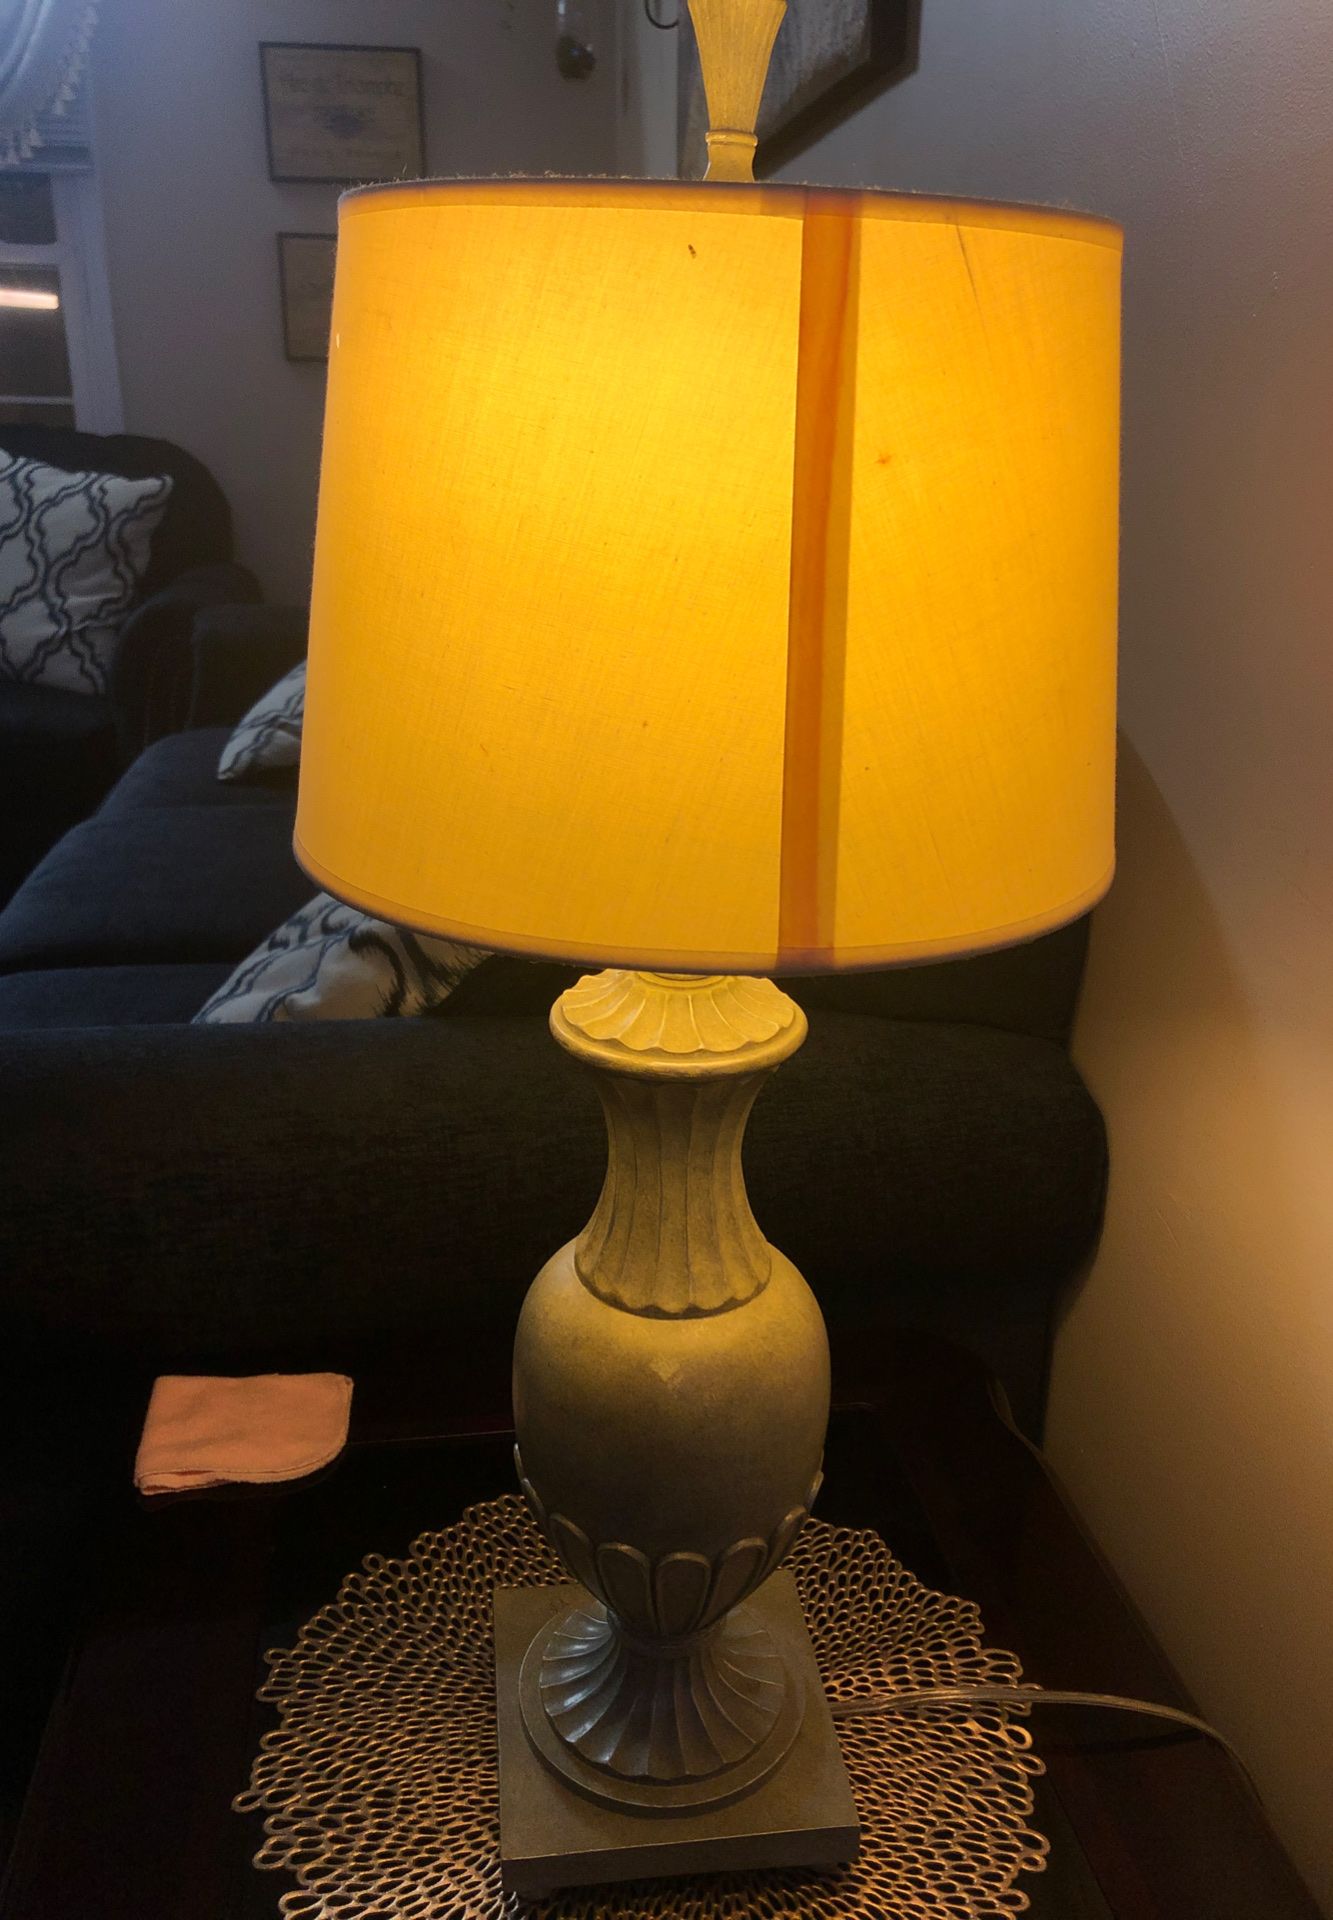 2 new lamp nothing wrong with it can take for just for 10$serious people text